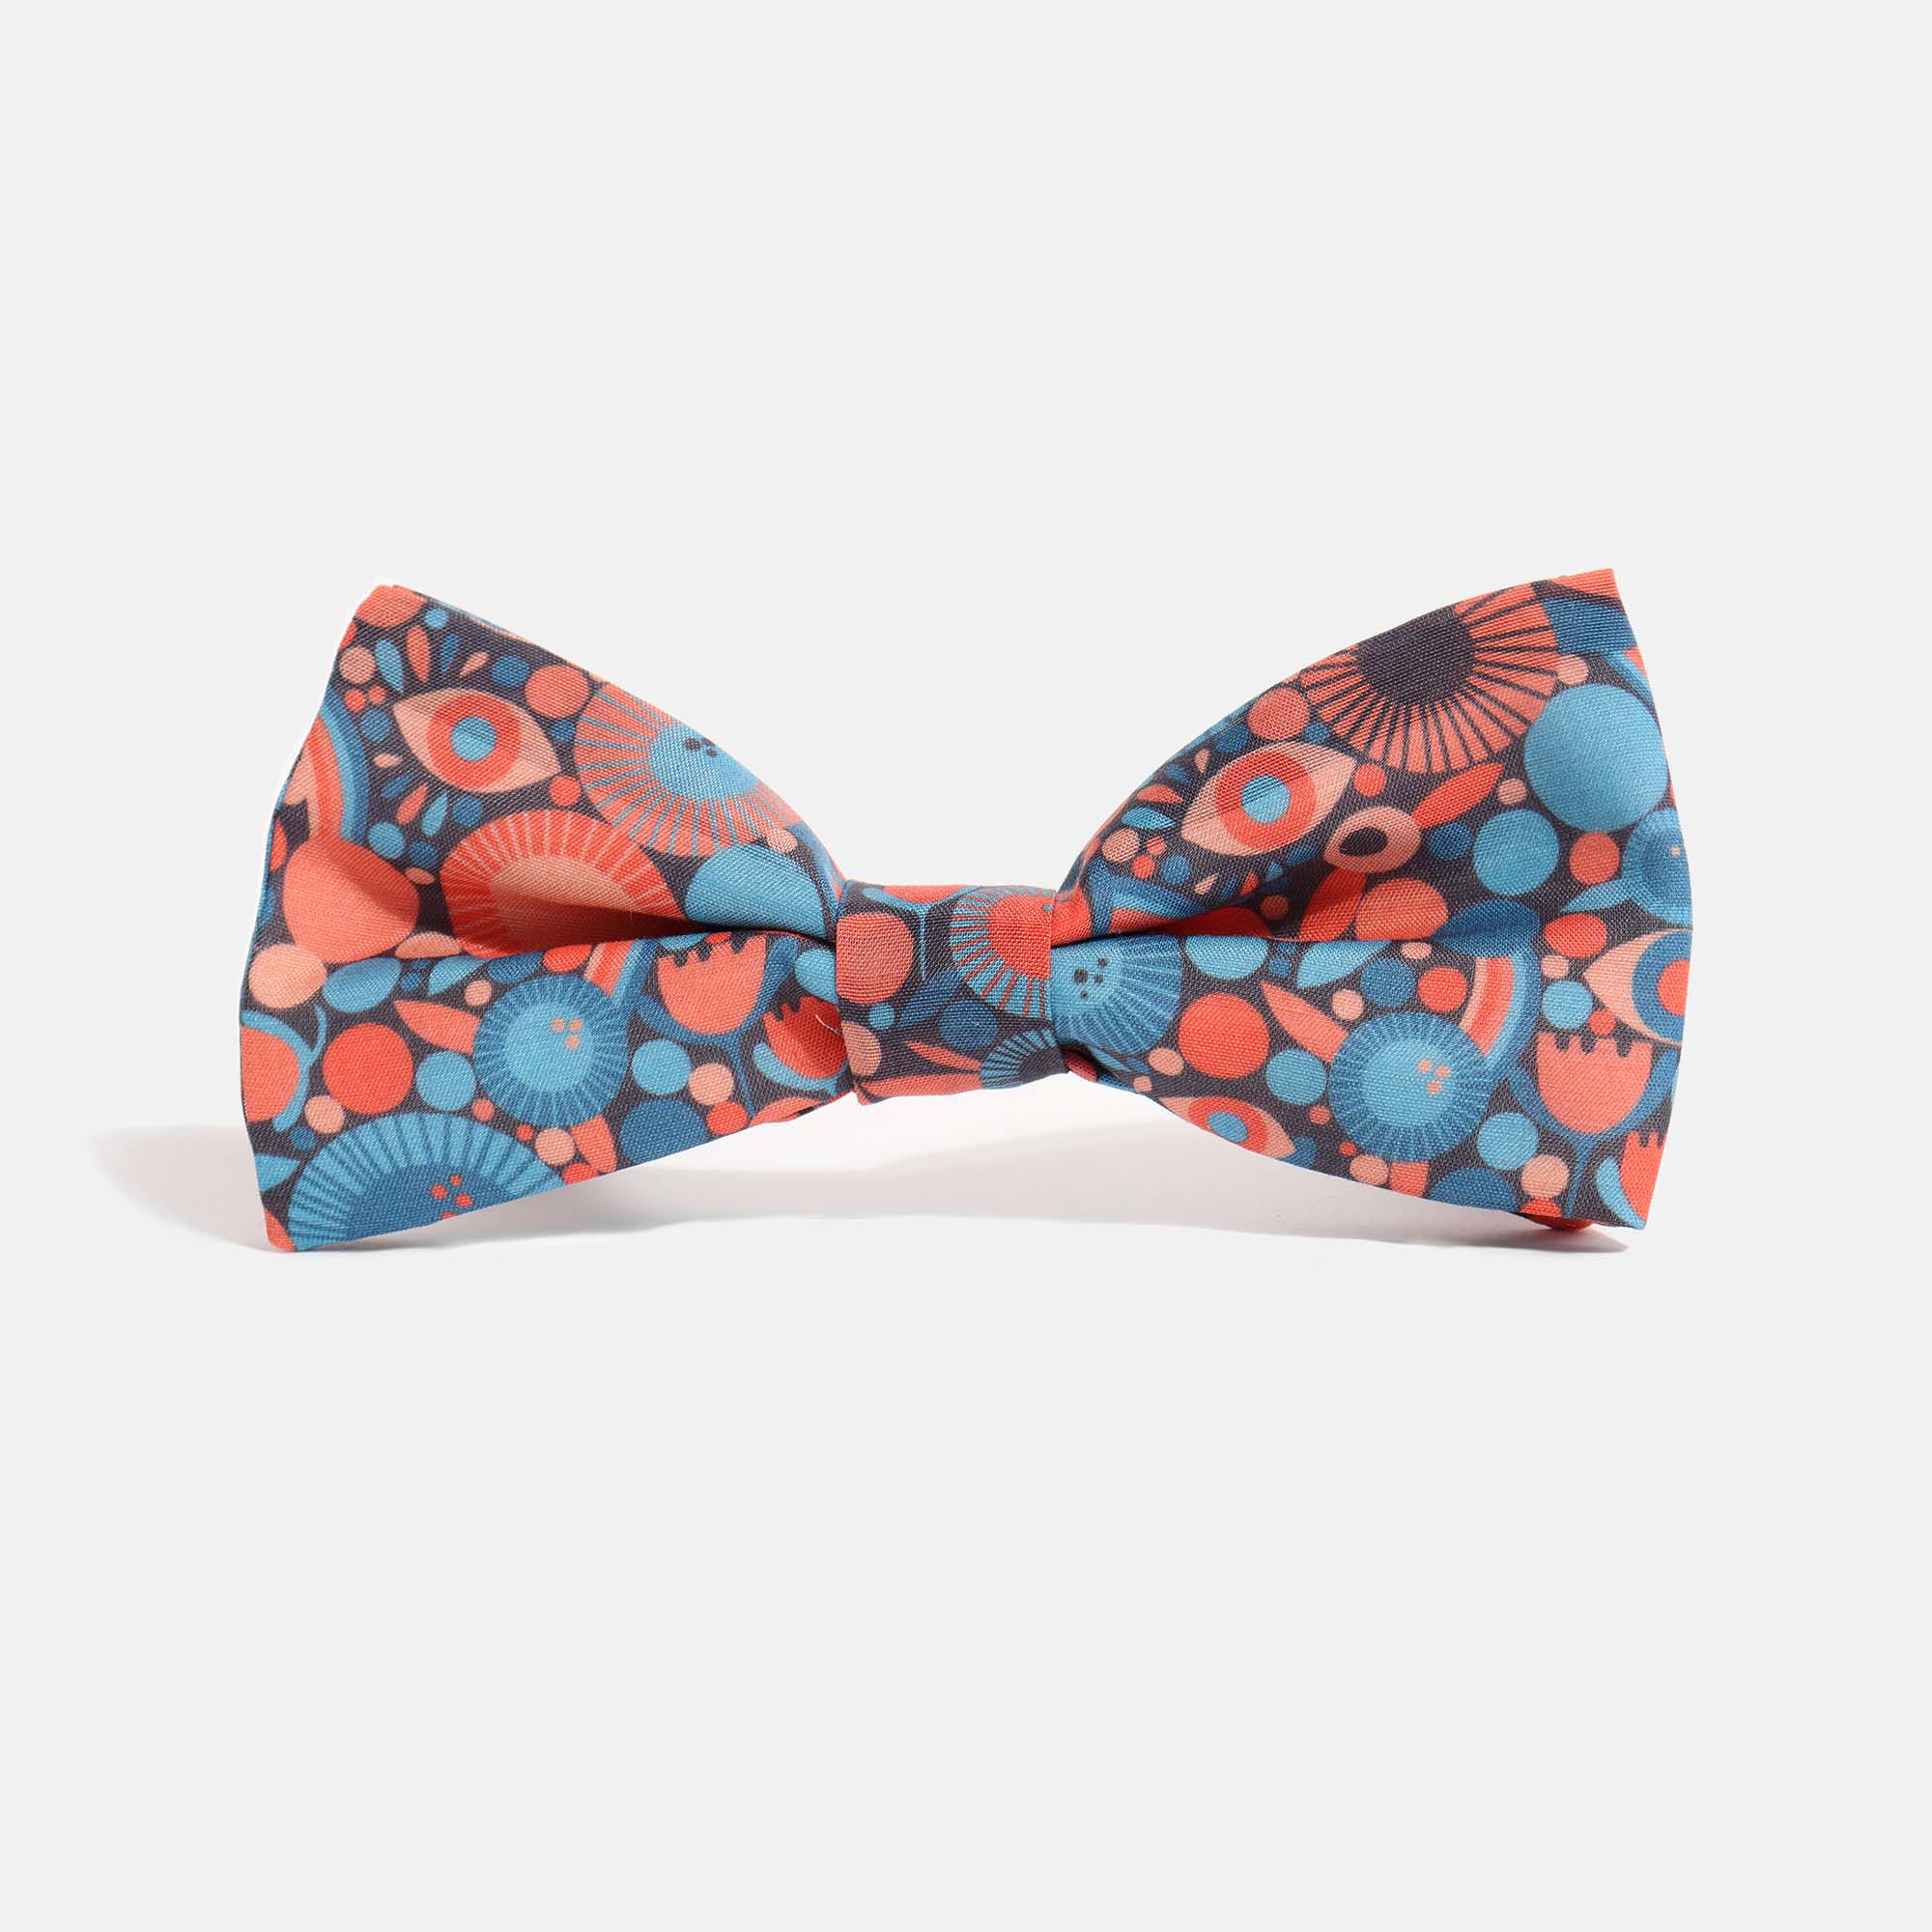 Lisa Congdon designed Blue/Orange abstract floral print Bow Tie on neutral backgound